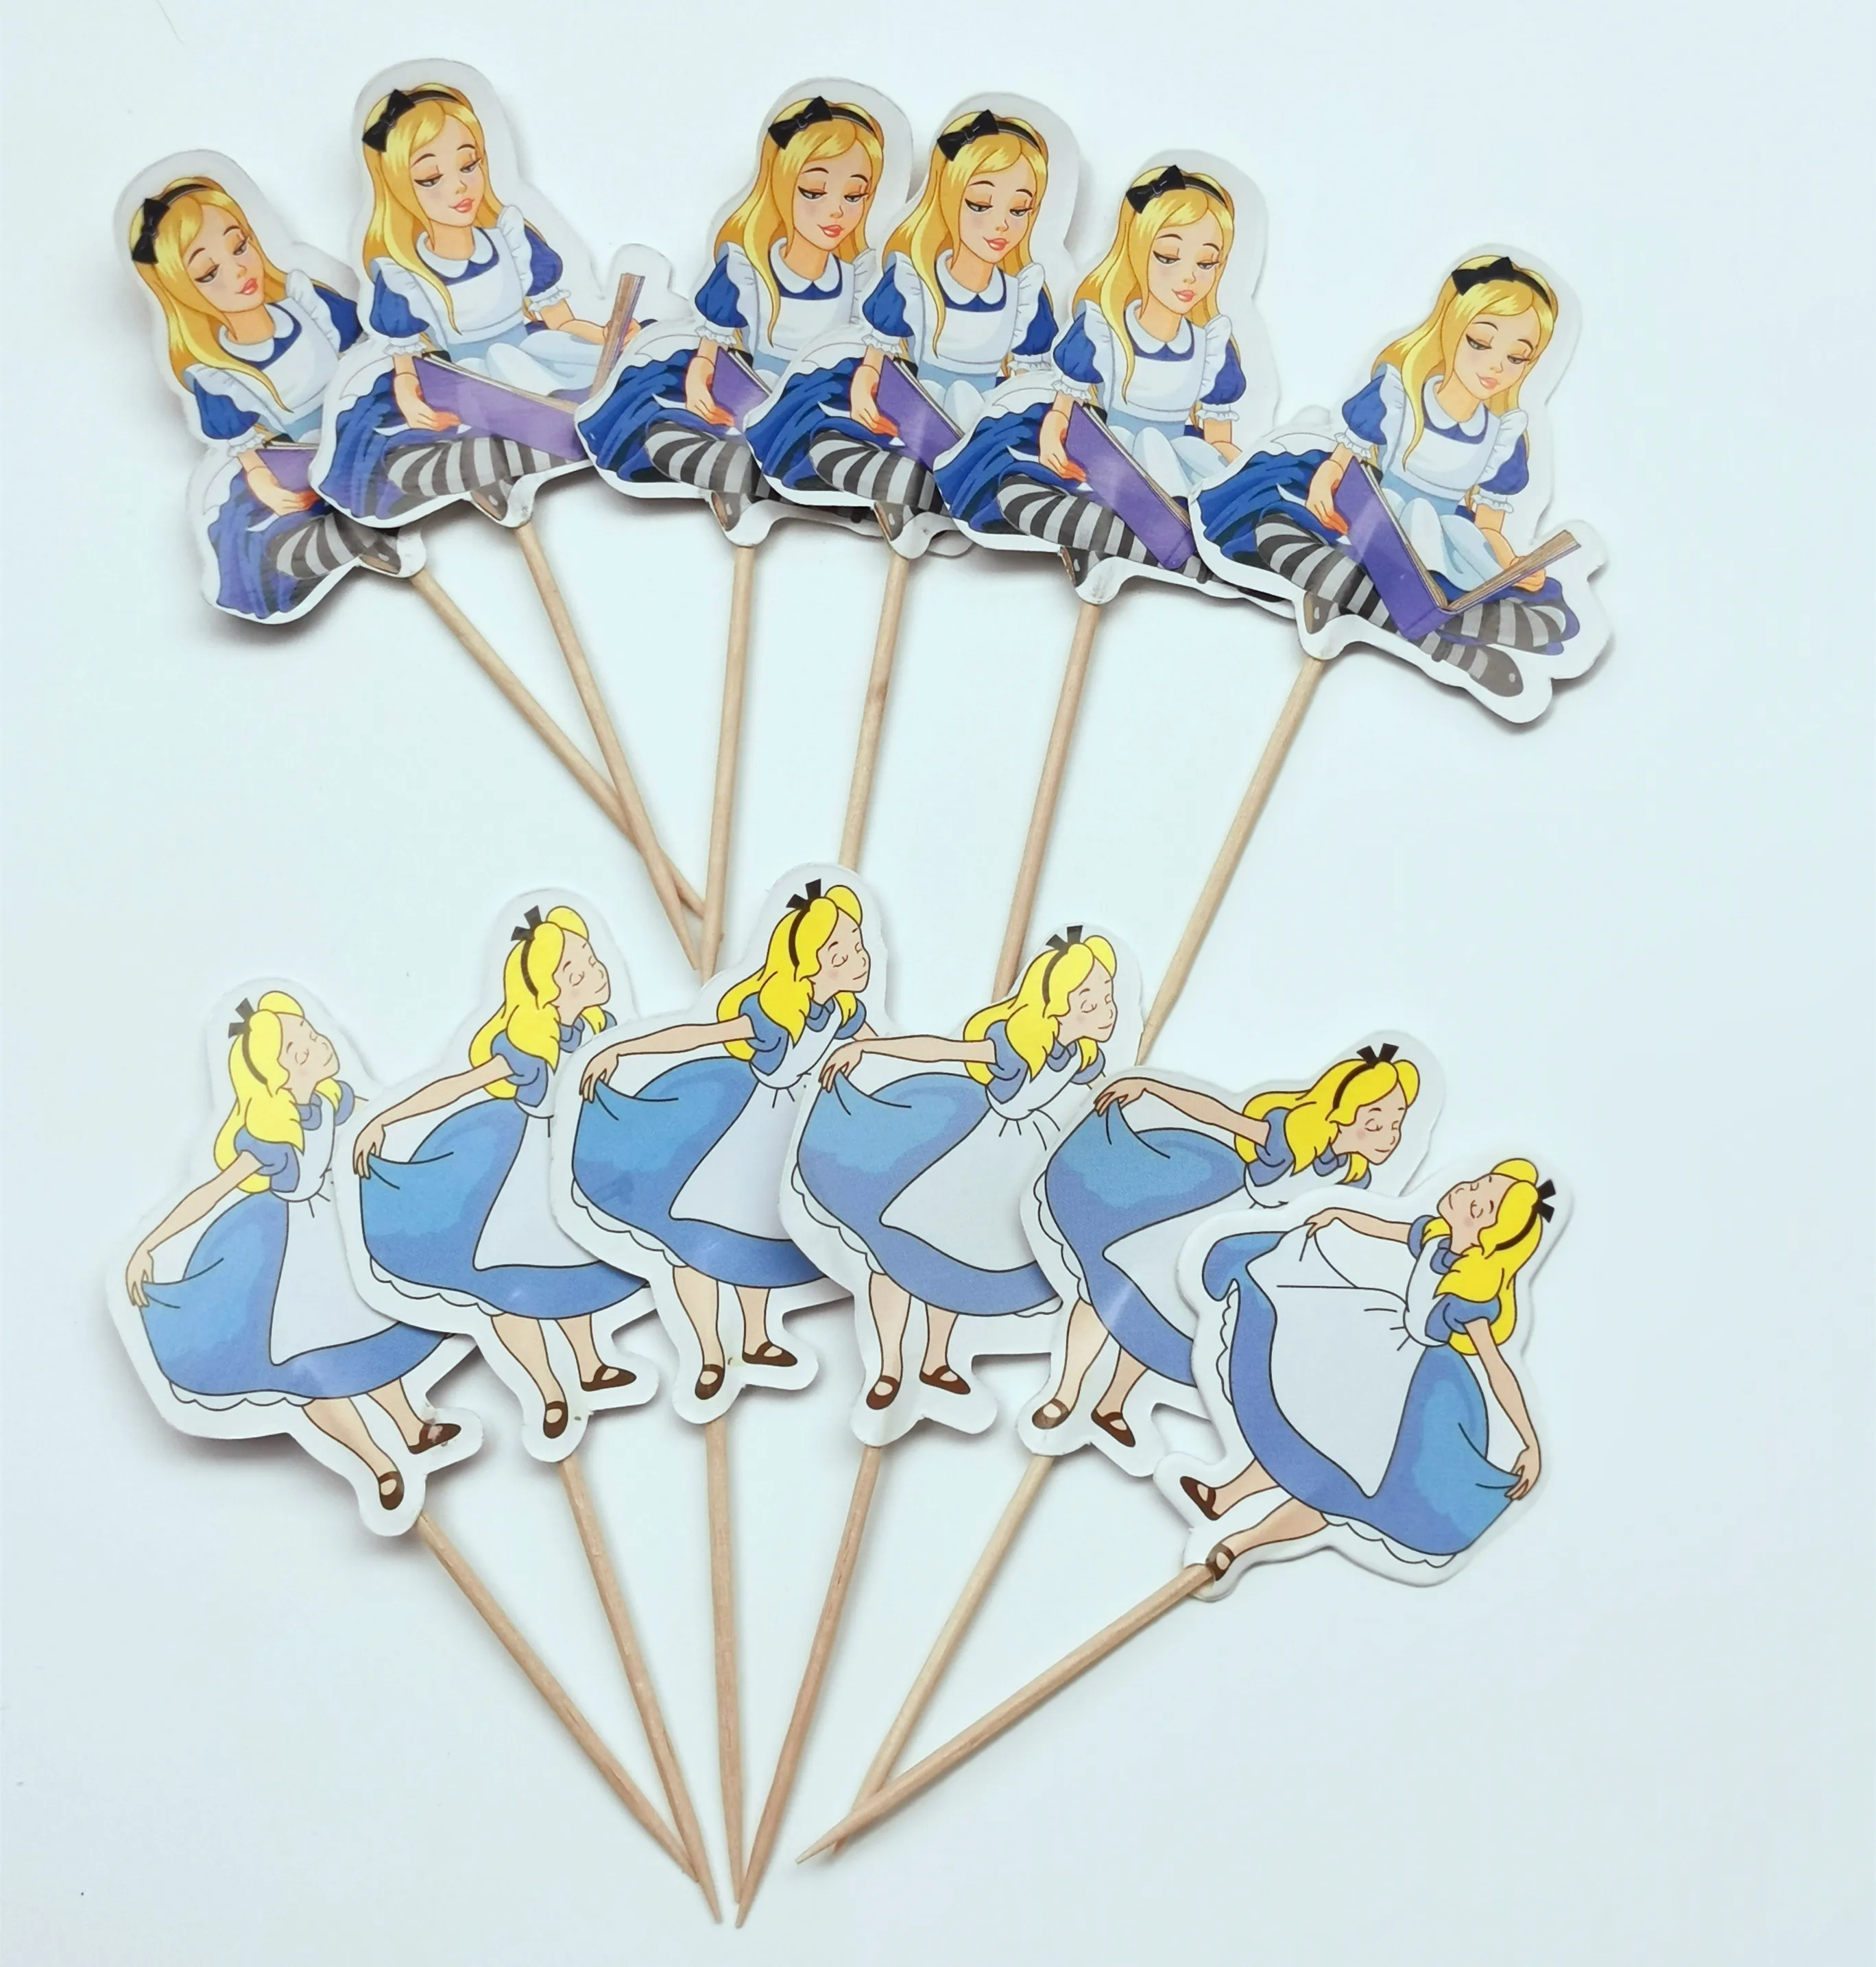 

24pcs/lot Alice in Wonderland Theme Cake Topper Girls Kids Favors Kids Birthday Party Cupcake Toppers Baby Shower Party